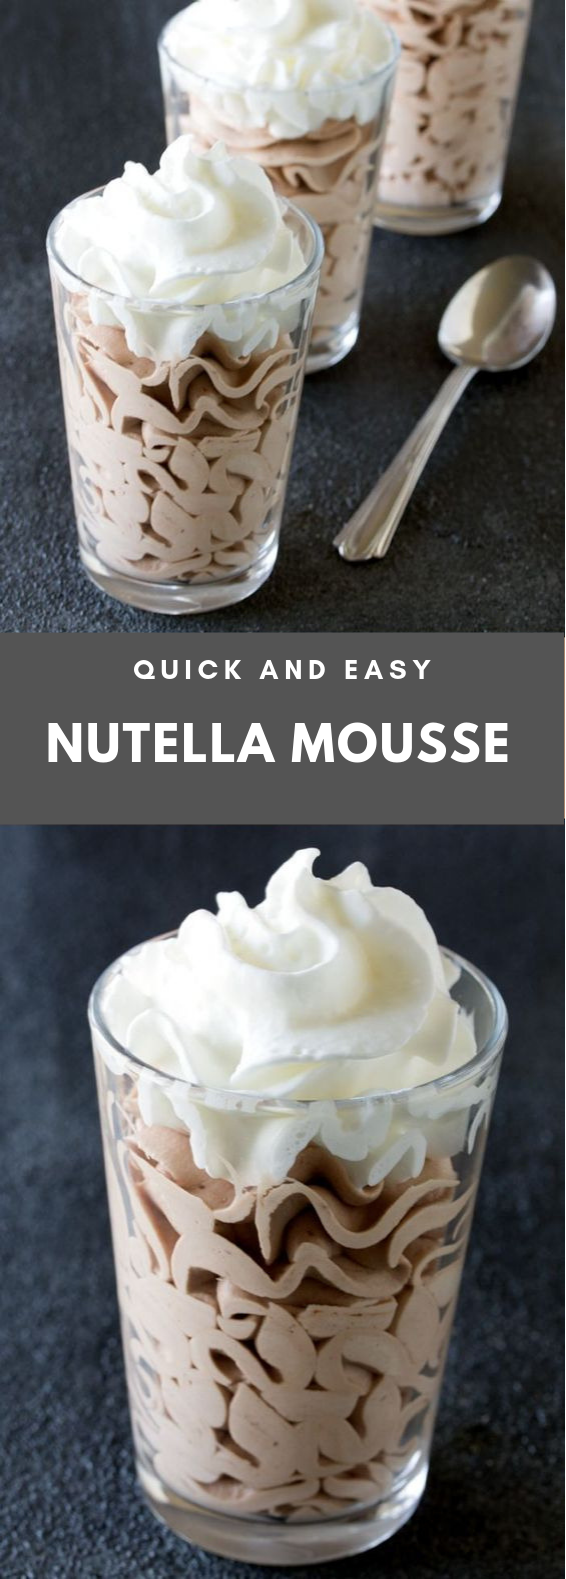 QUICK AND EASY NUTELLA MOUSSE #Dessert #Nutella